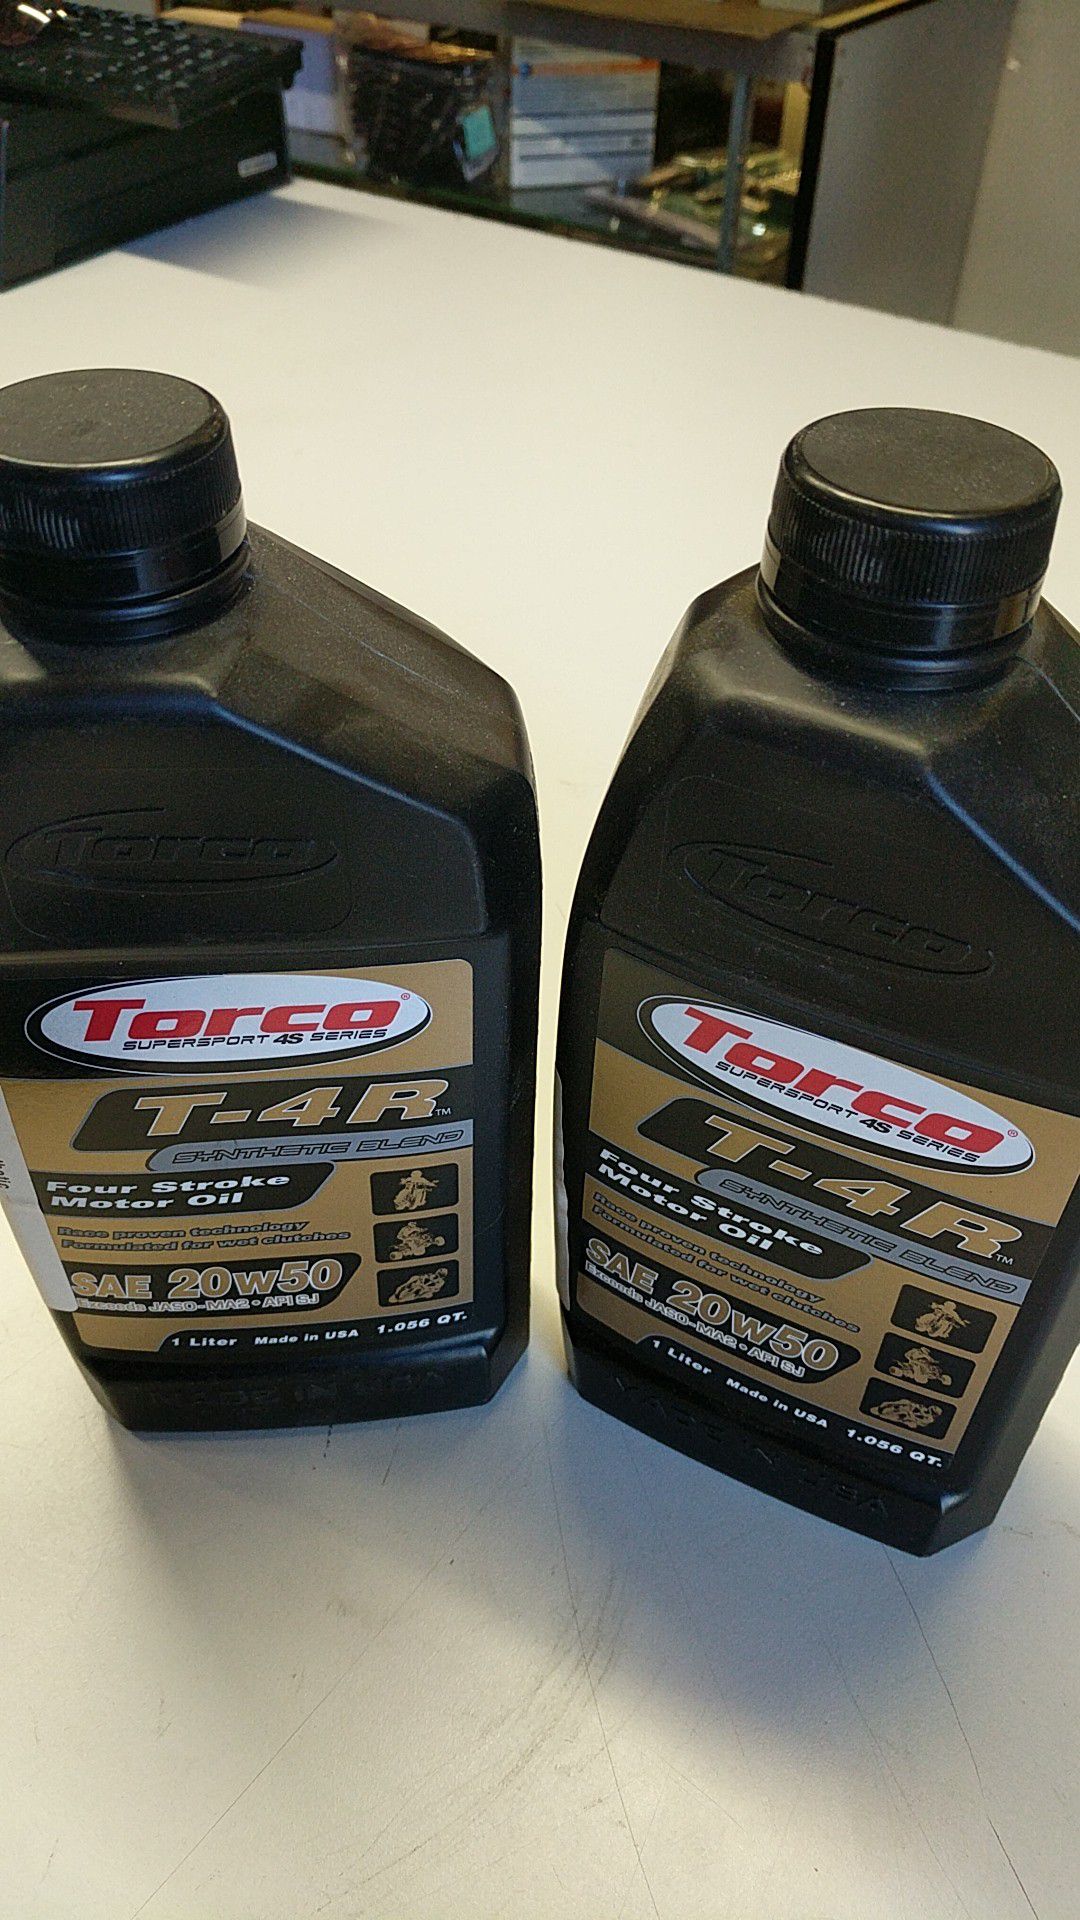 Motorcycle oil. Torco Supersport T-4R synthetic blend SAE 20W50 1 LITER